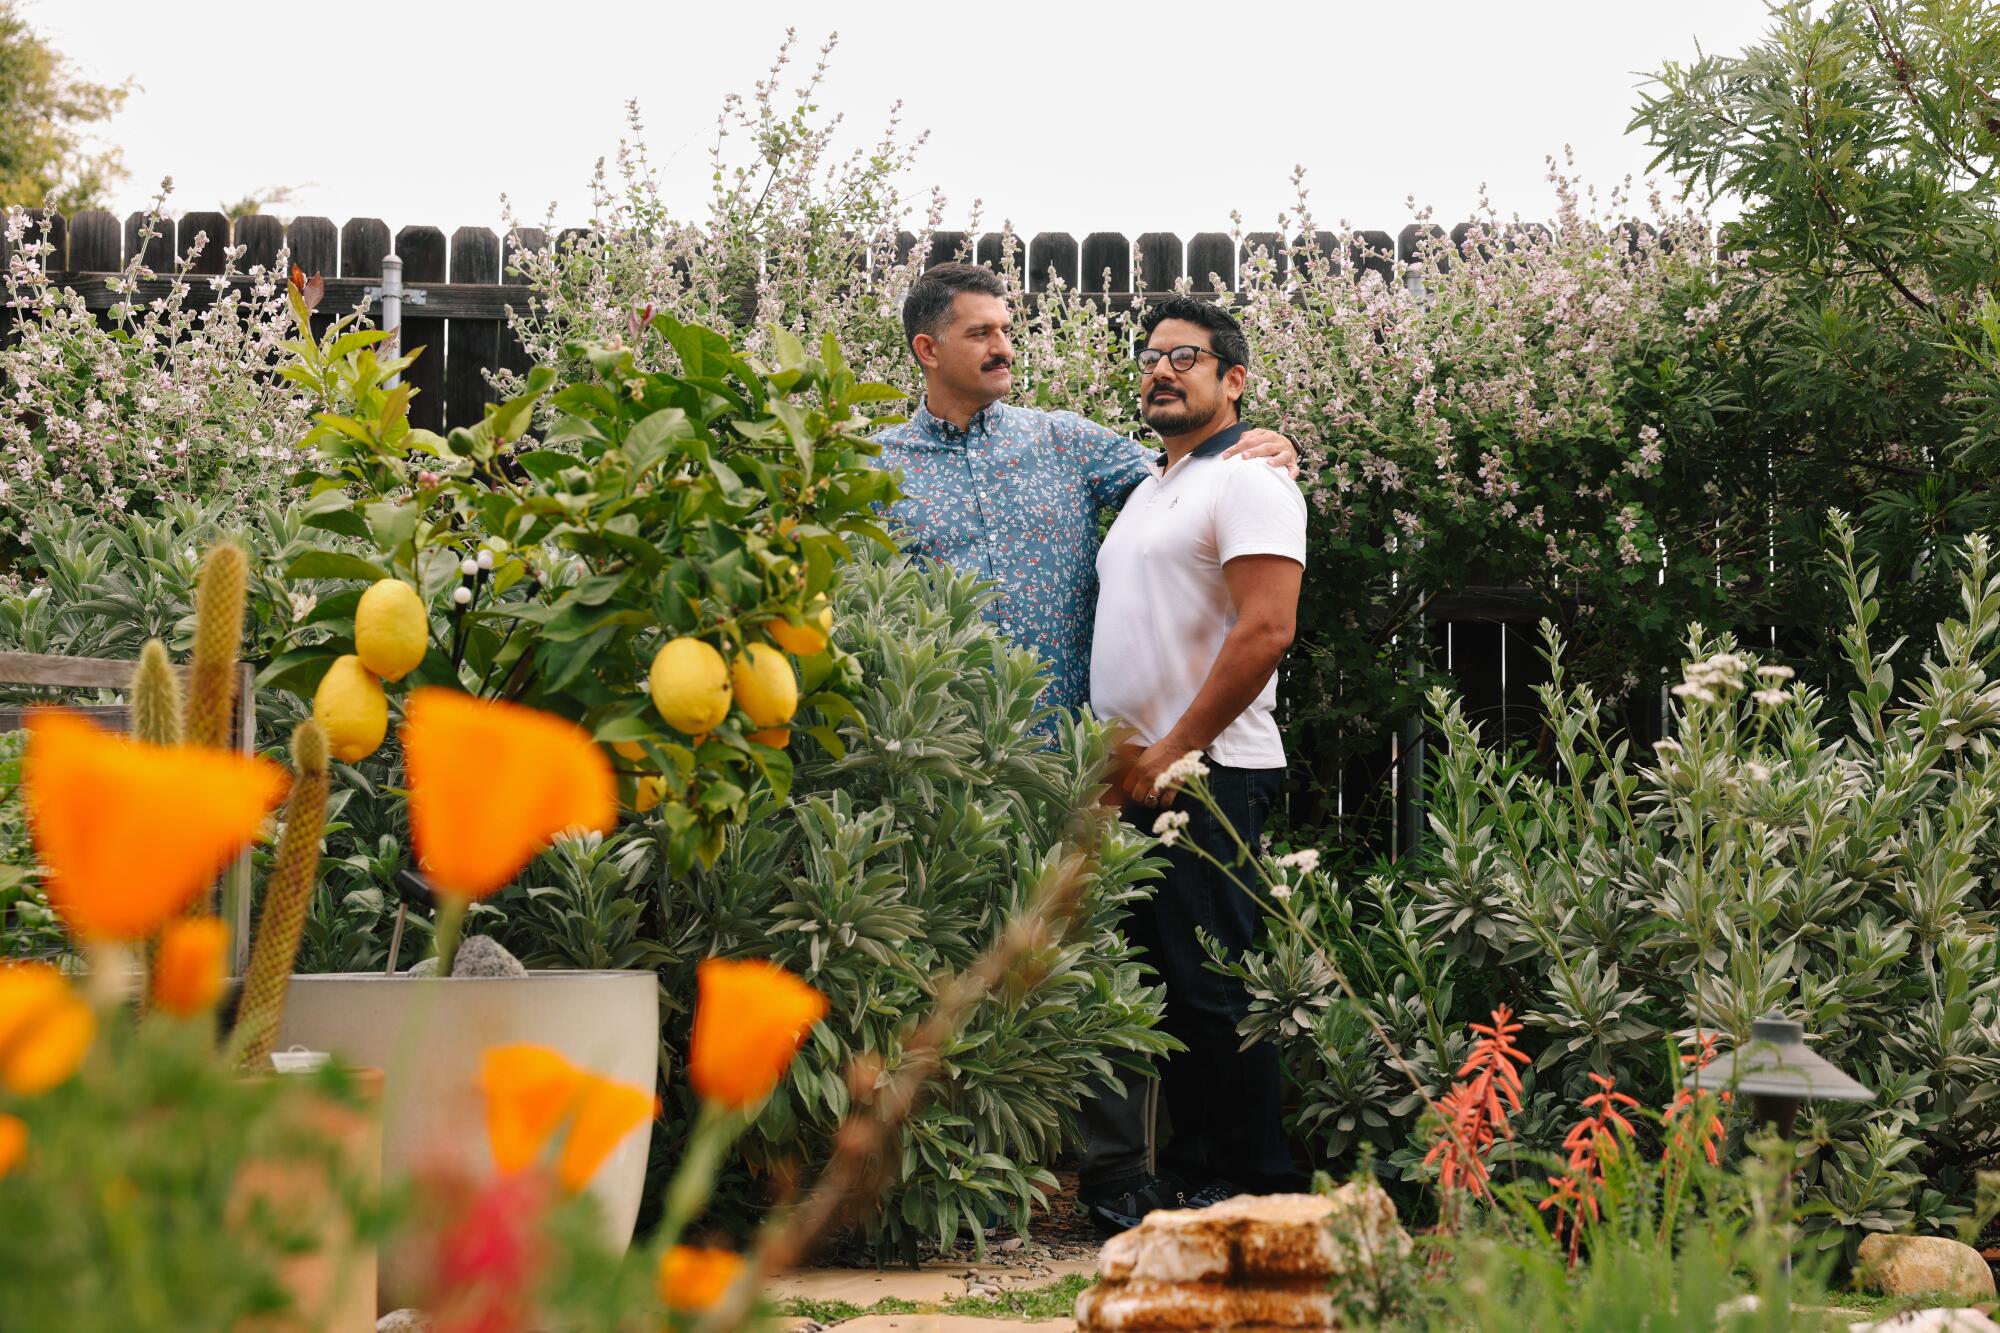 Two men stand in their backyard, which is filled with plants including California poppies and a lemon tree